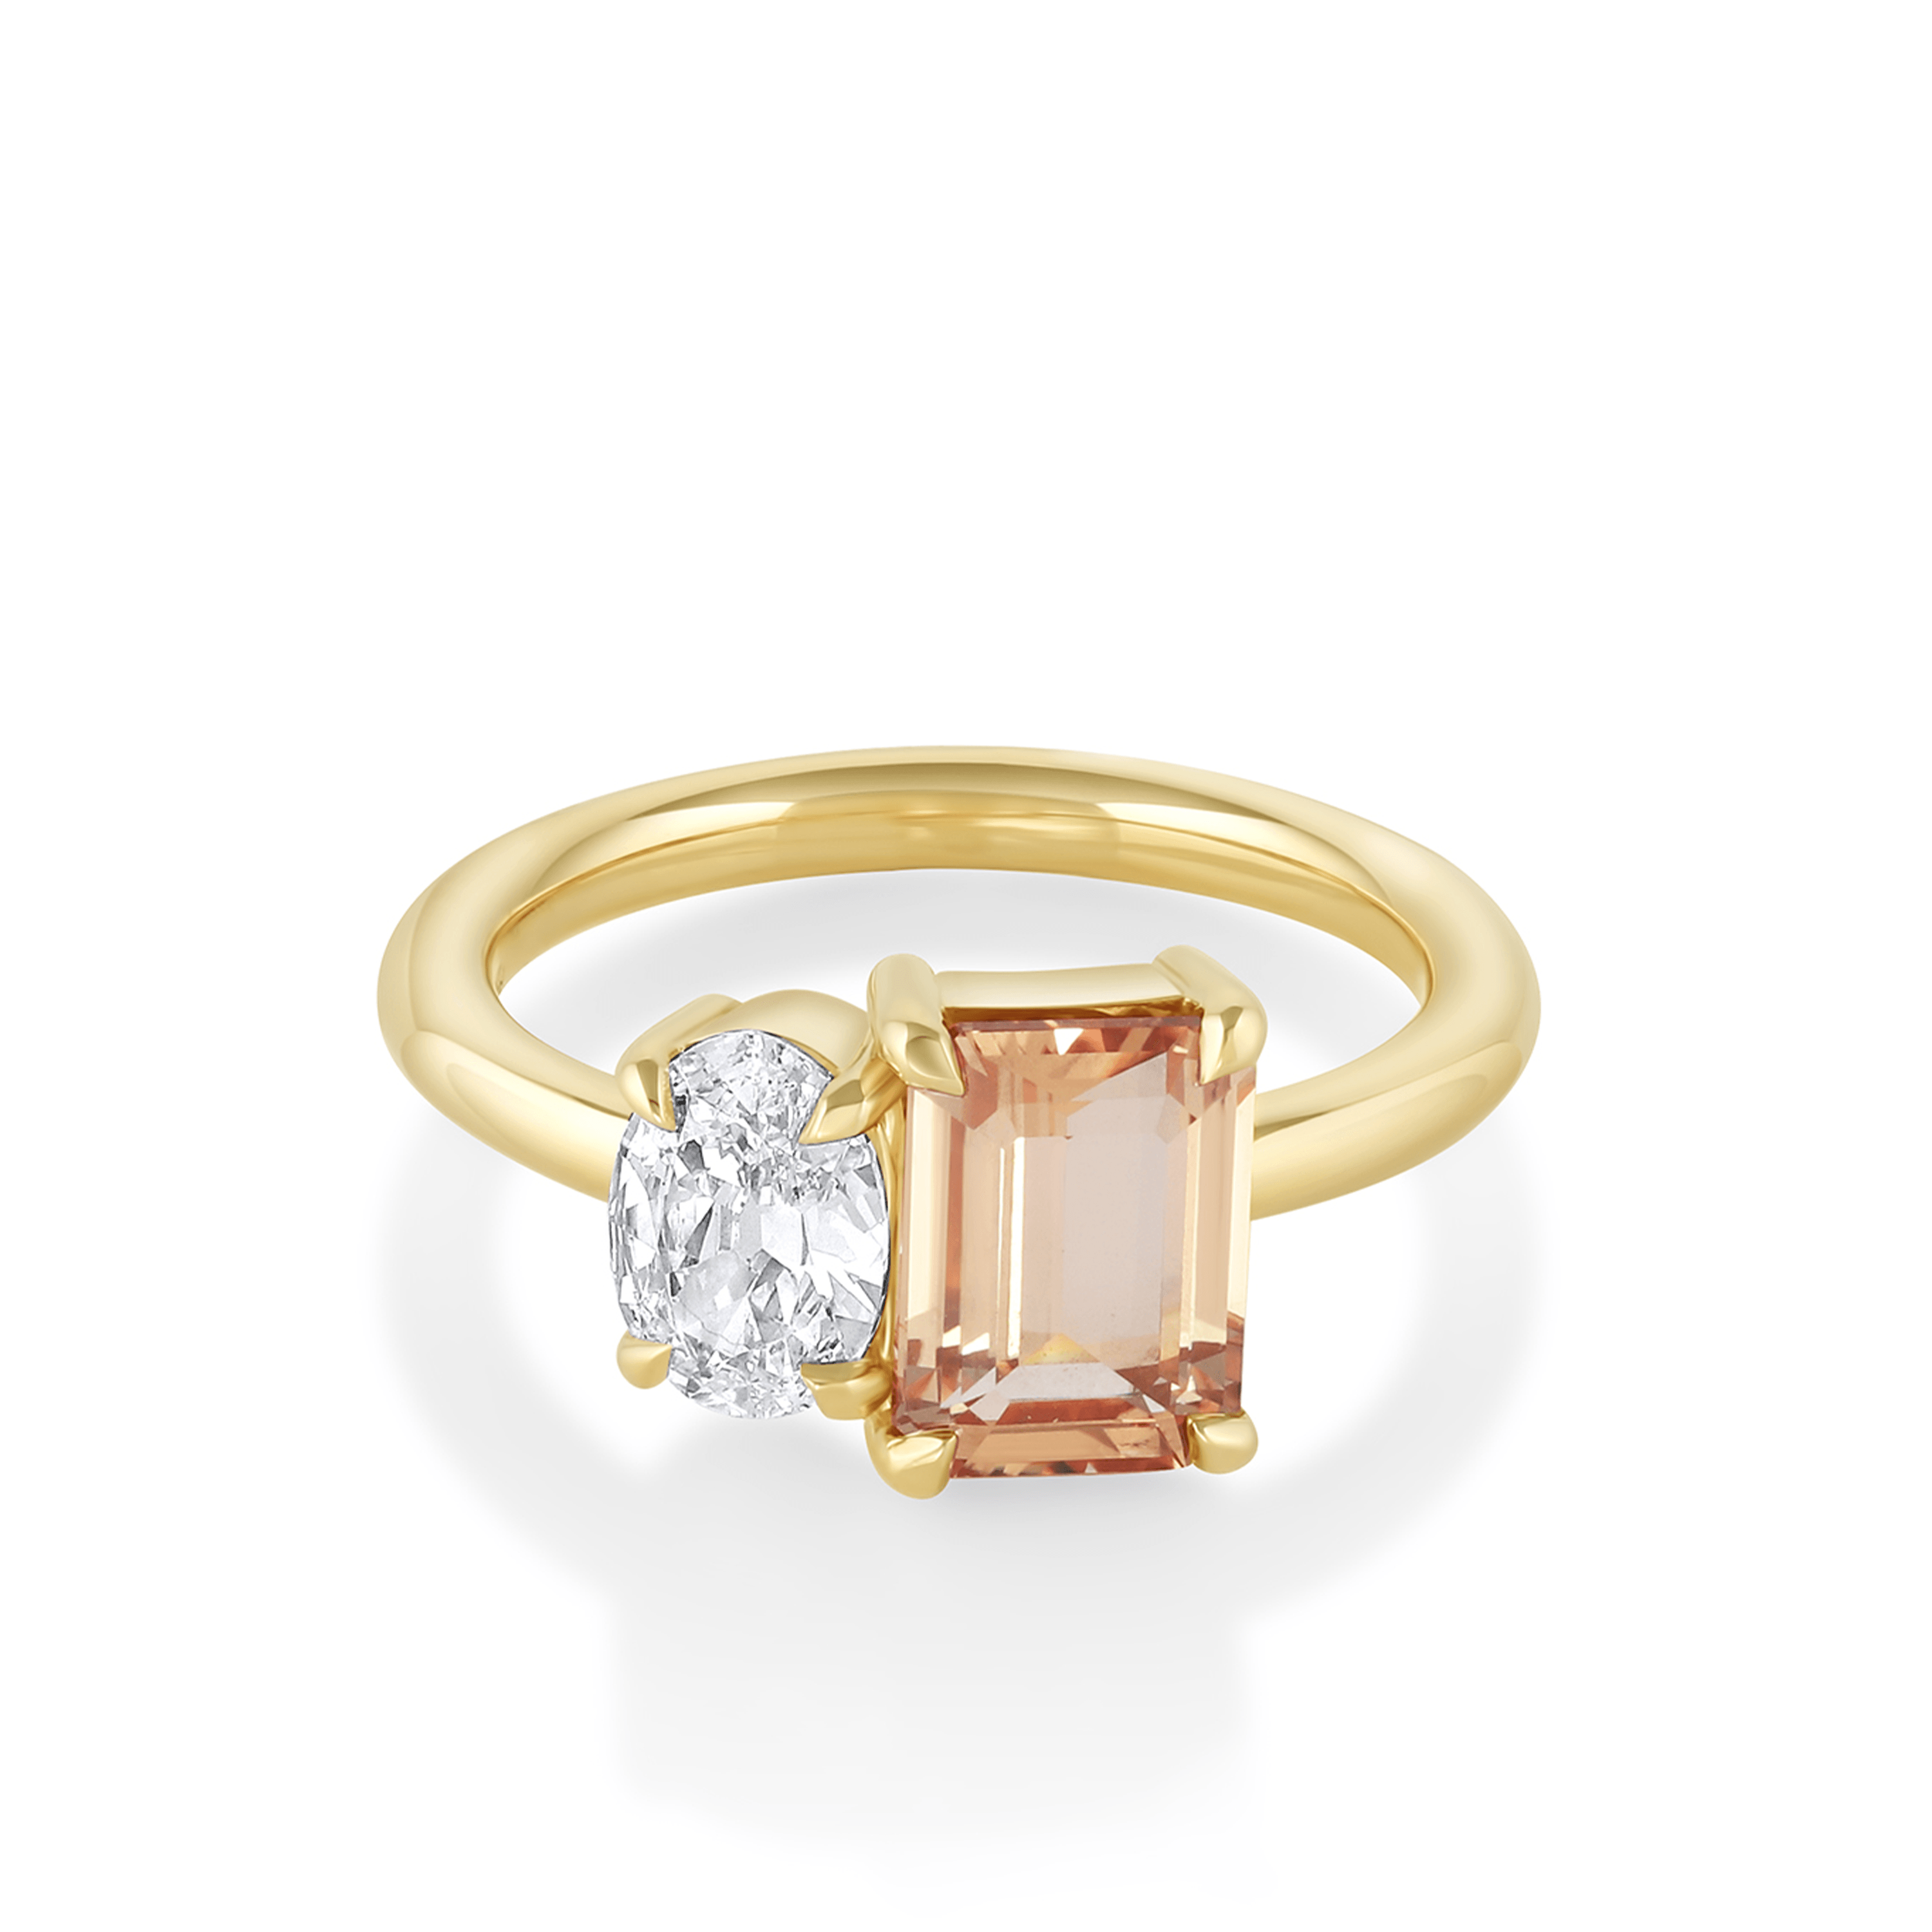 Features a 2.01ct natural peach sapphire emerald cut & .68ct F/SI1 hybrid oval